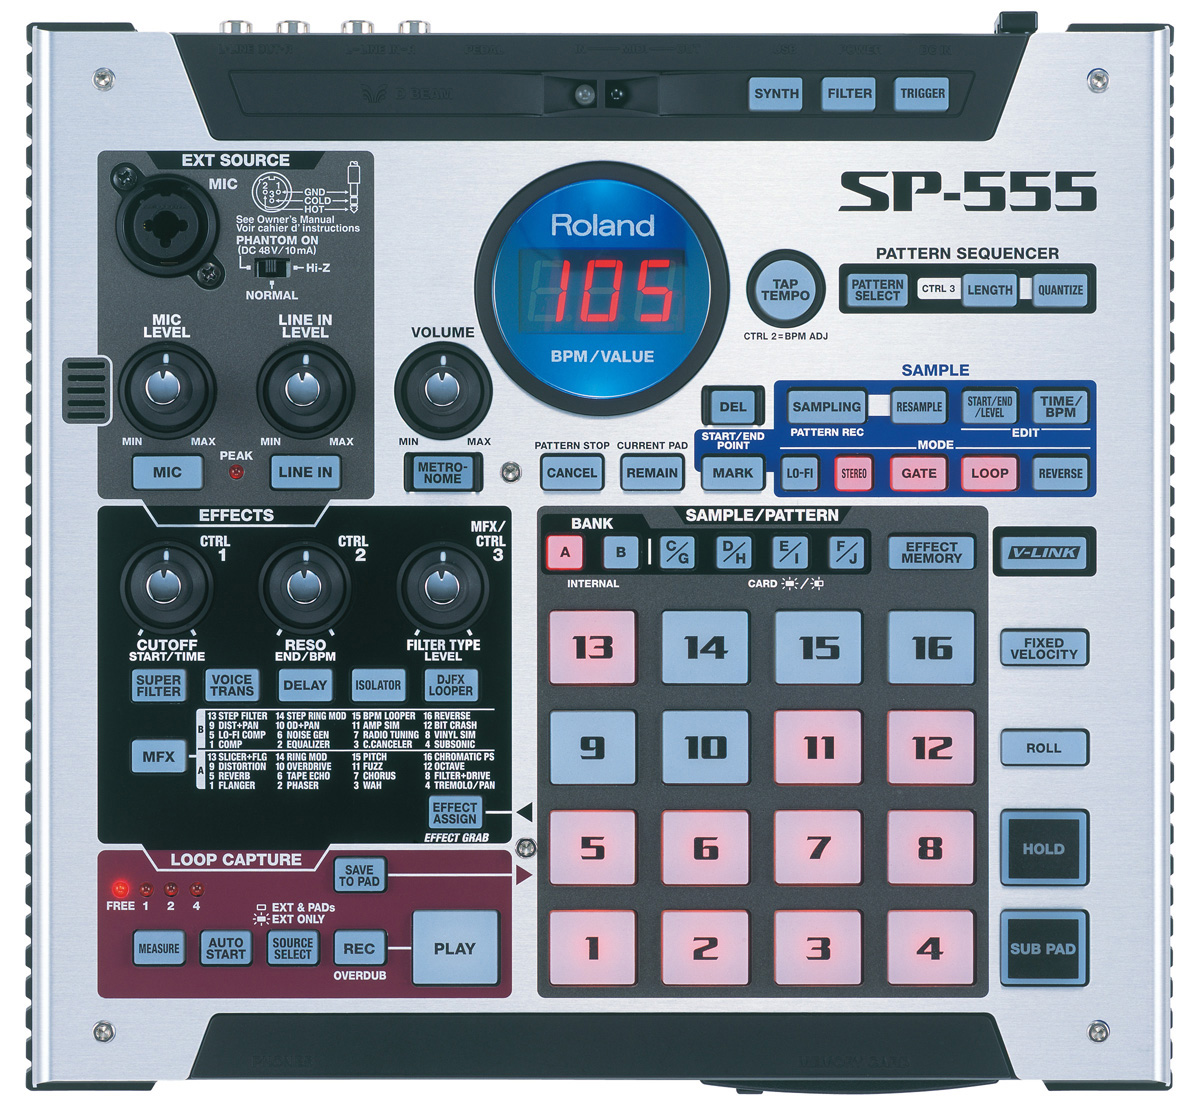 Roland SP-555 drivers for Windows 10 64bits